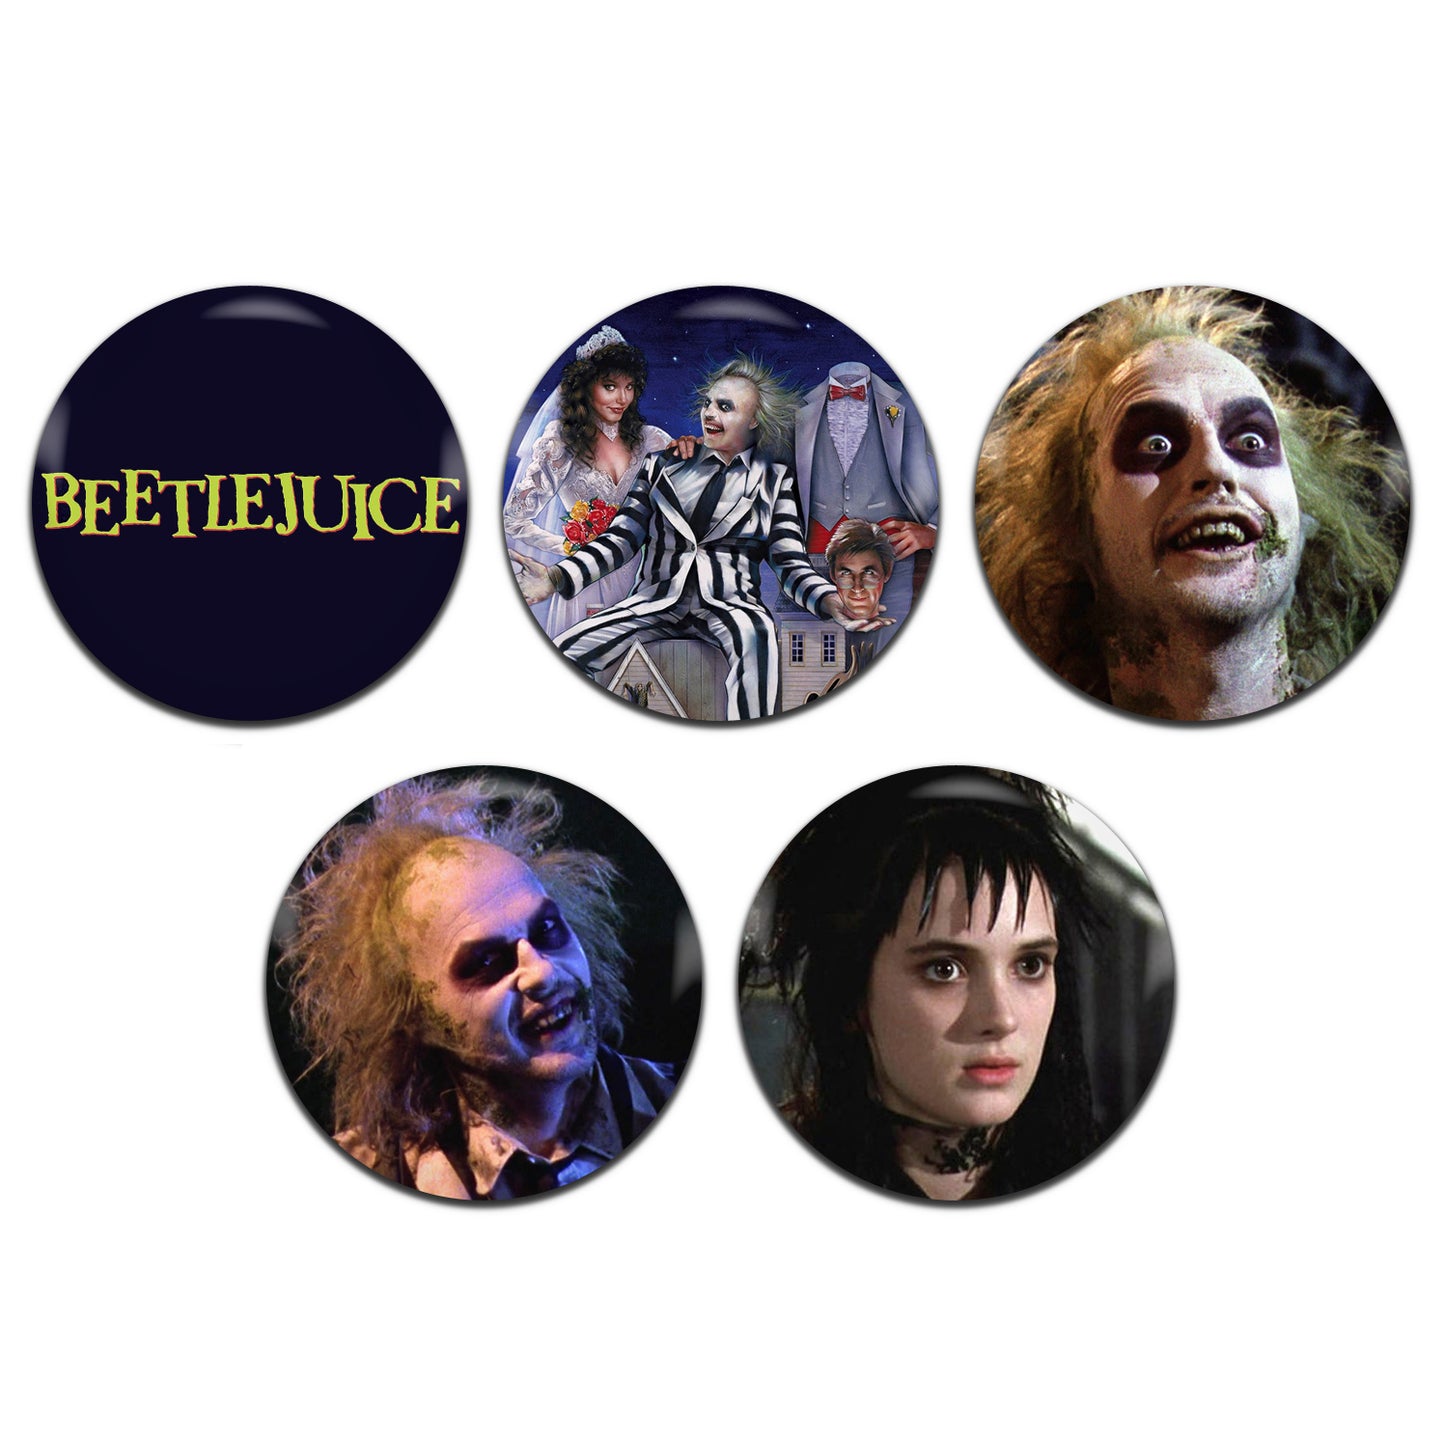 Beetlejuice Movie Fantasy Horror Film 80's 25mm / 1 Inch D-Pin Button Badges (5x Set)